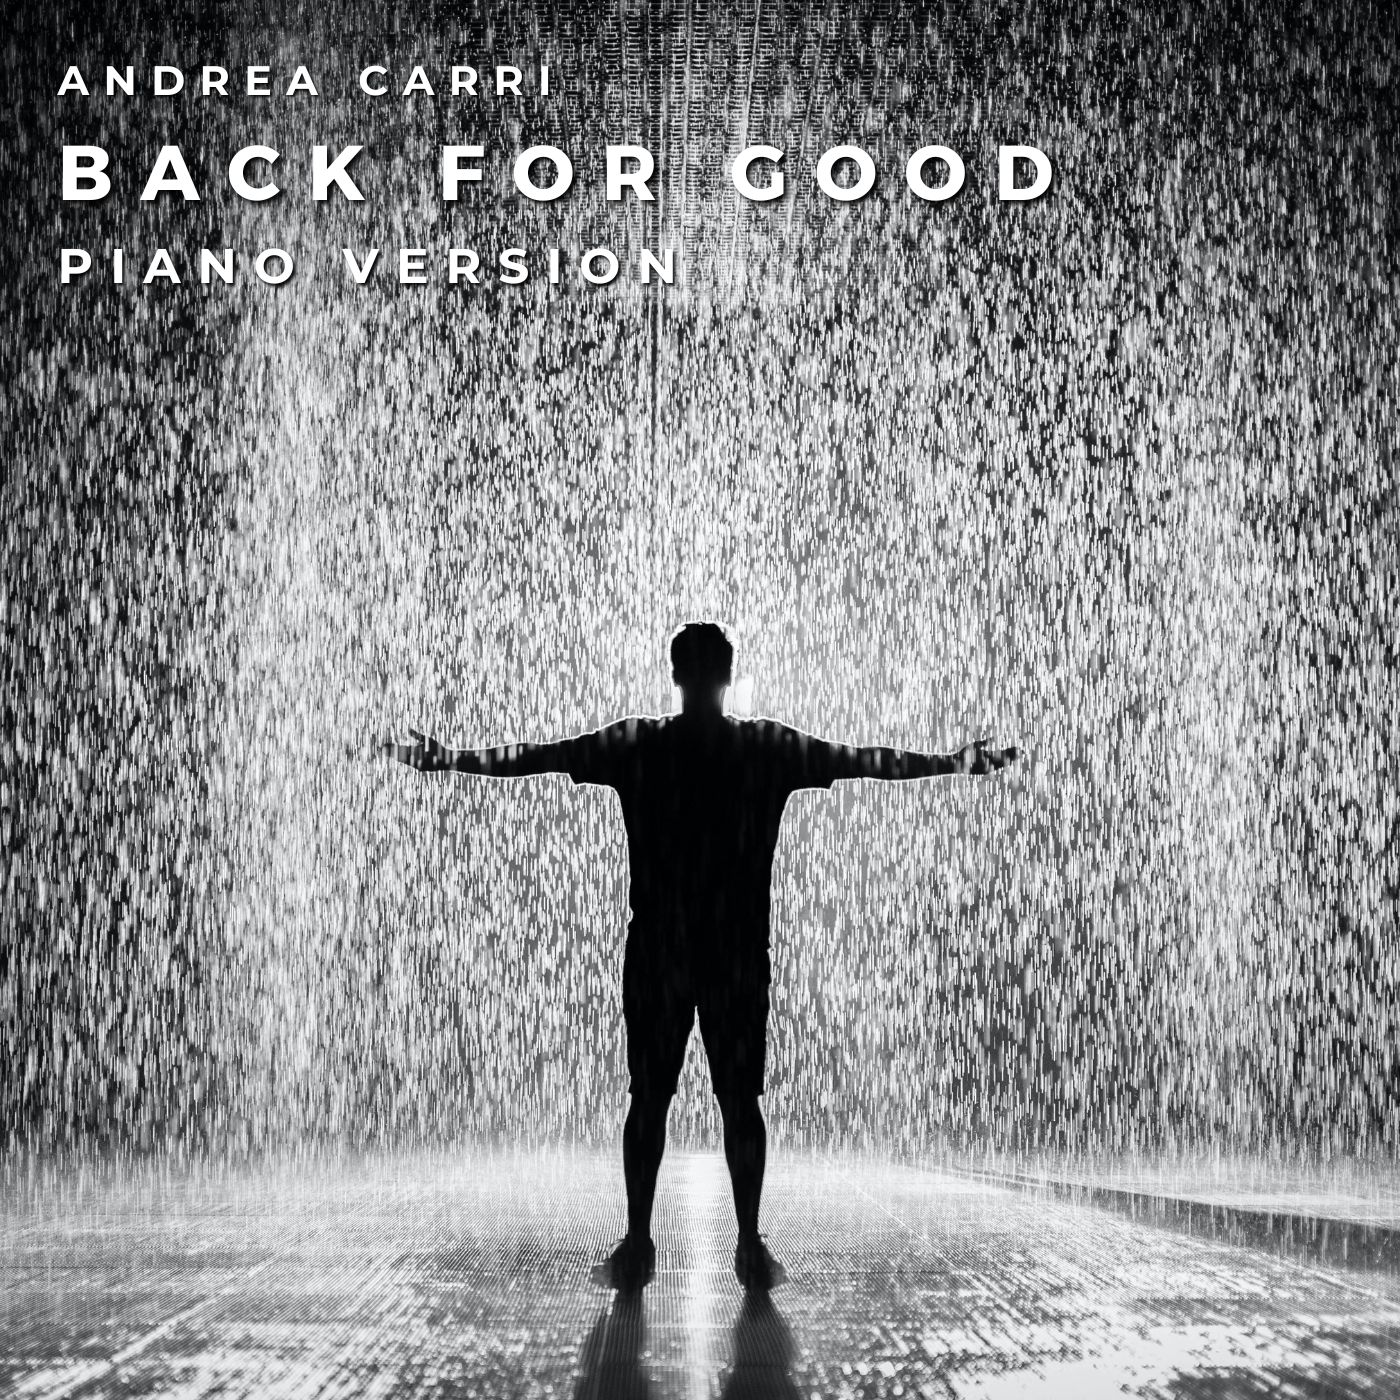 Back for Good (Piano Version)